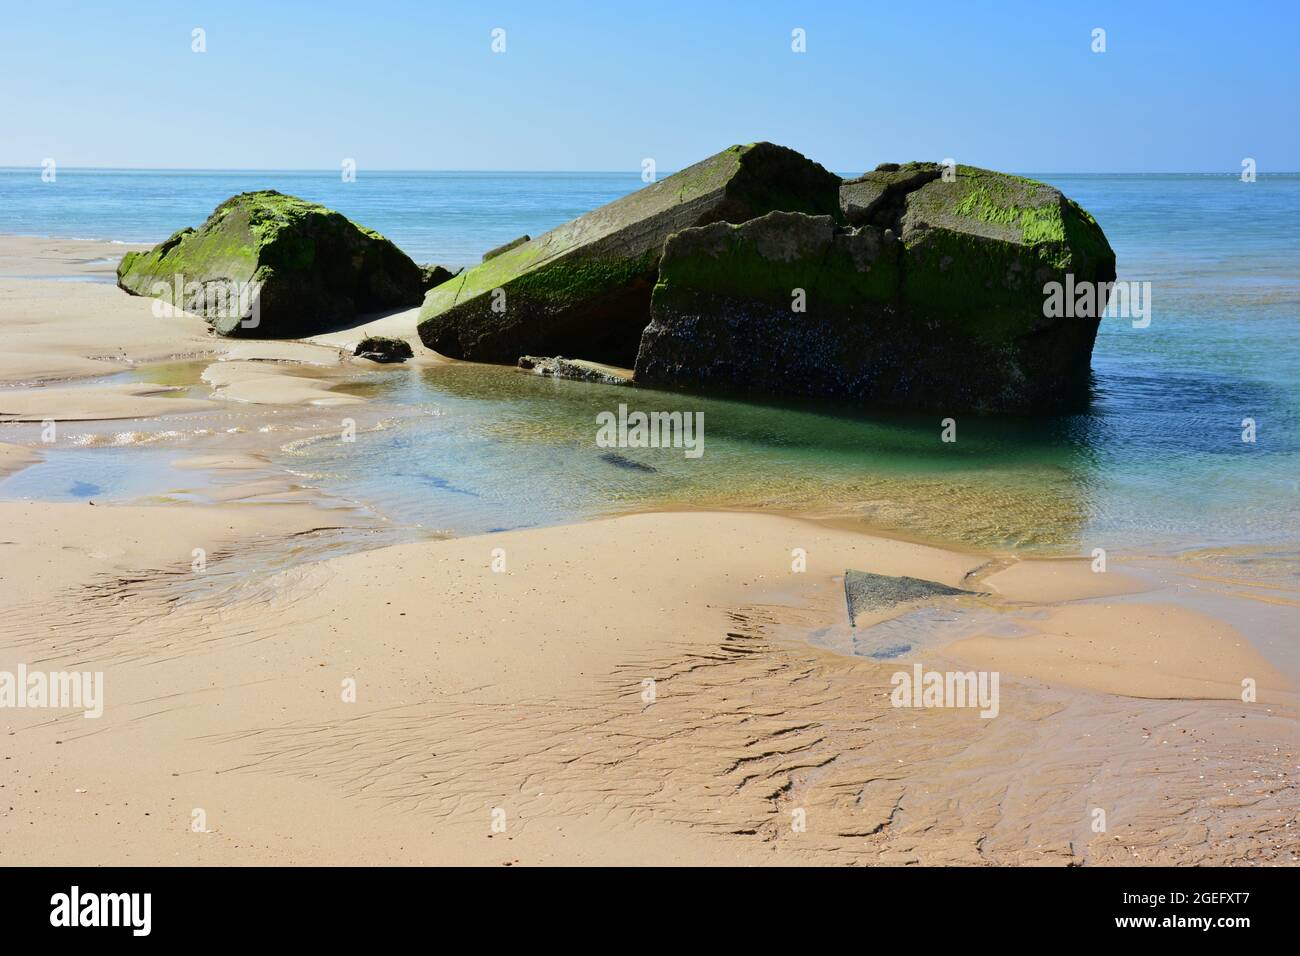 France, Aquitaine, following the coastal retreat, this bunker is ripped open and silted up gy currents, tides, storms and increase of sea level. Stock Photo